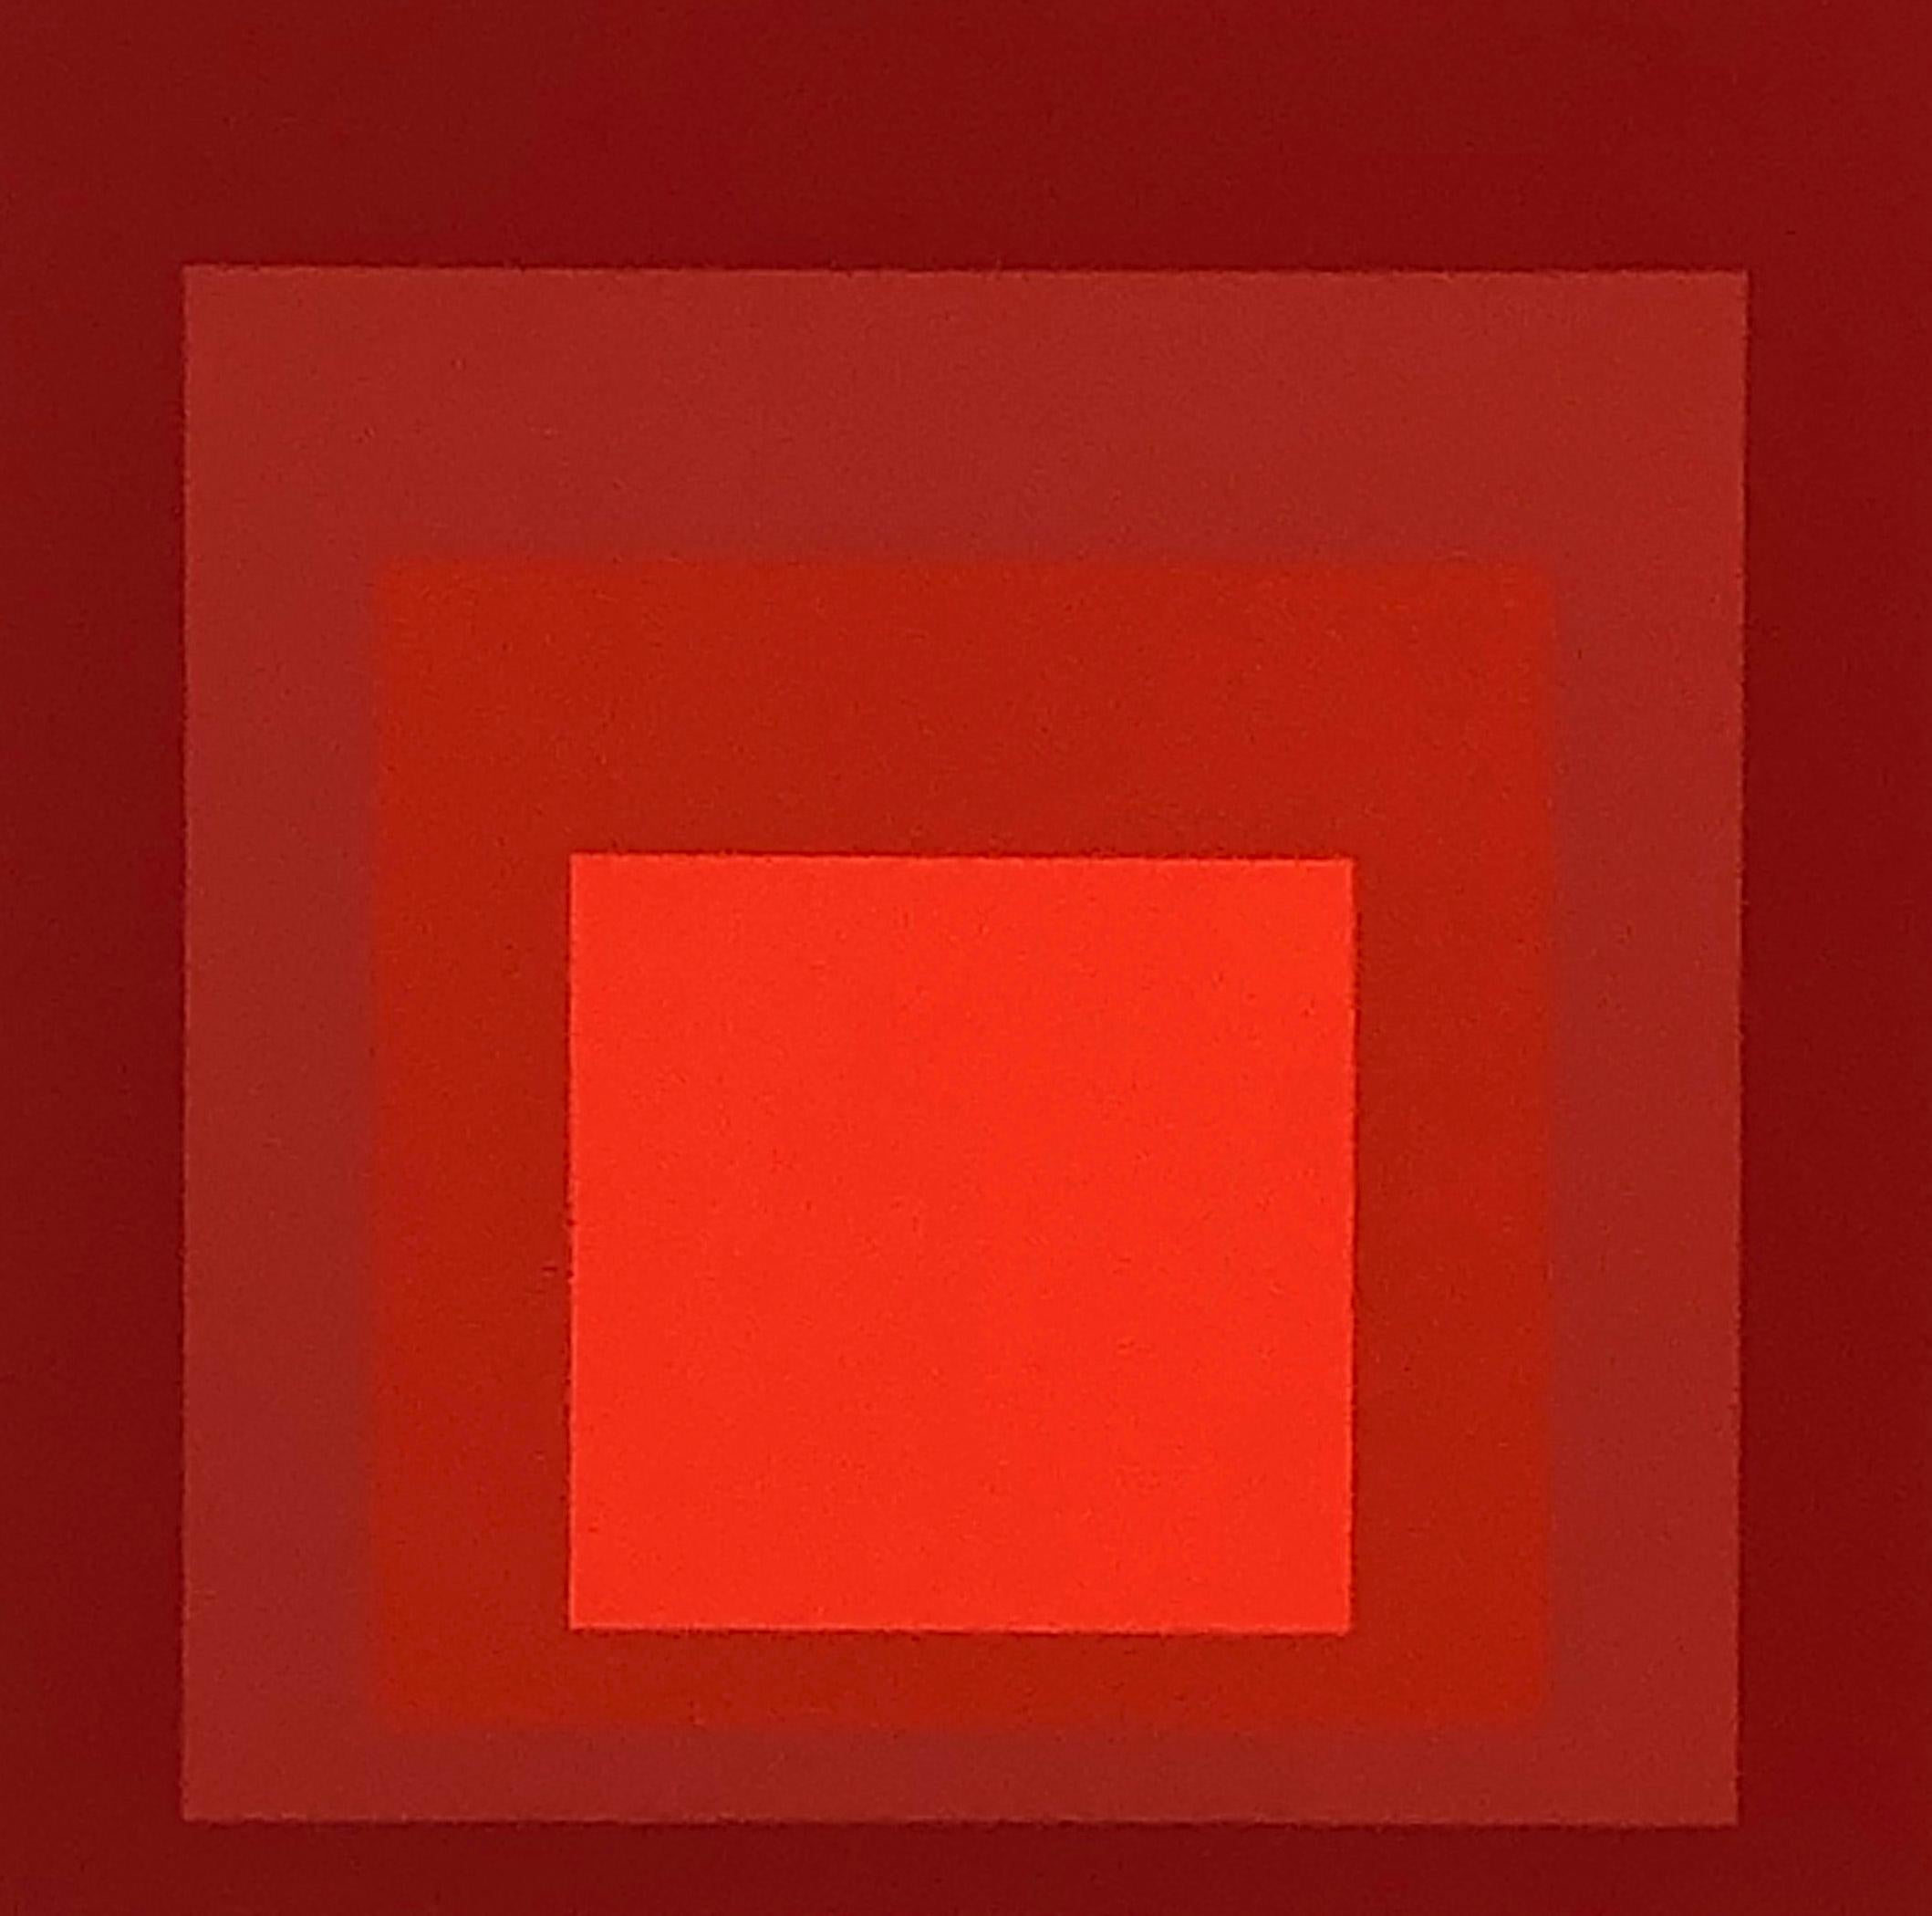 Albers Homage to the Square screen-print 1977 (Josef Albers prints)  - Print by (after) Josef Albers